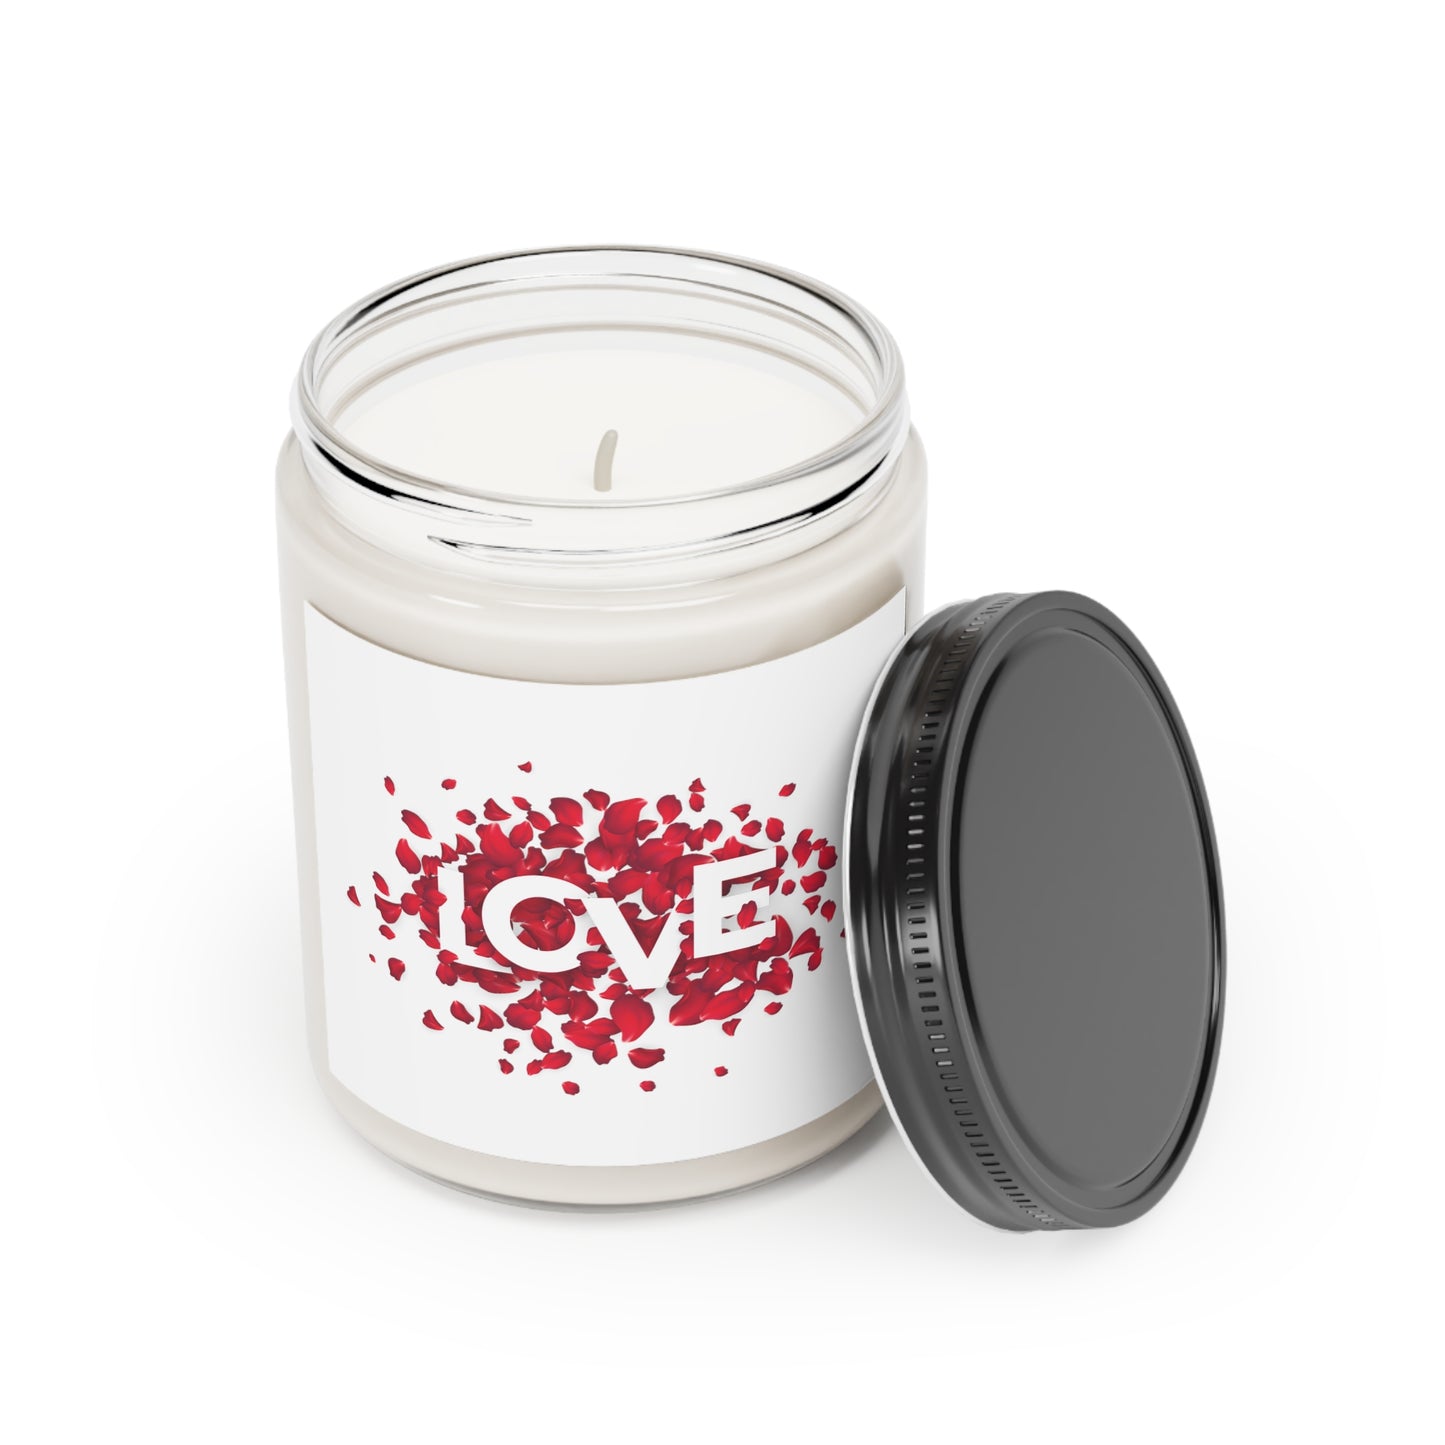 Gift for Her, Valentine's Scented Candle, Love with Flowers Printed Scanted Candles